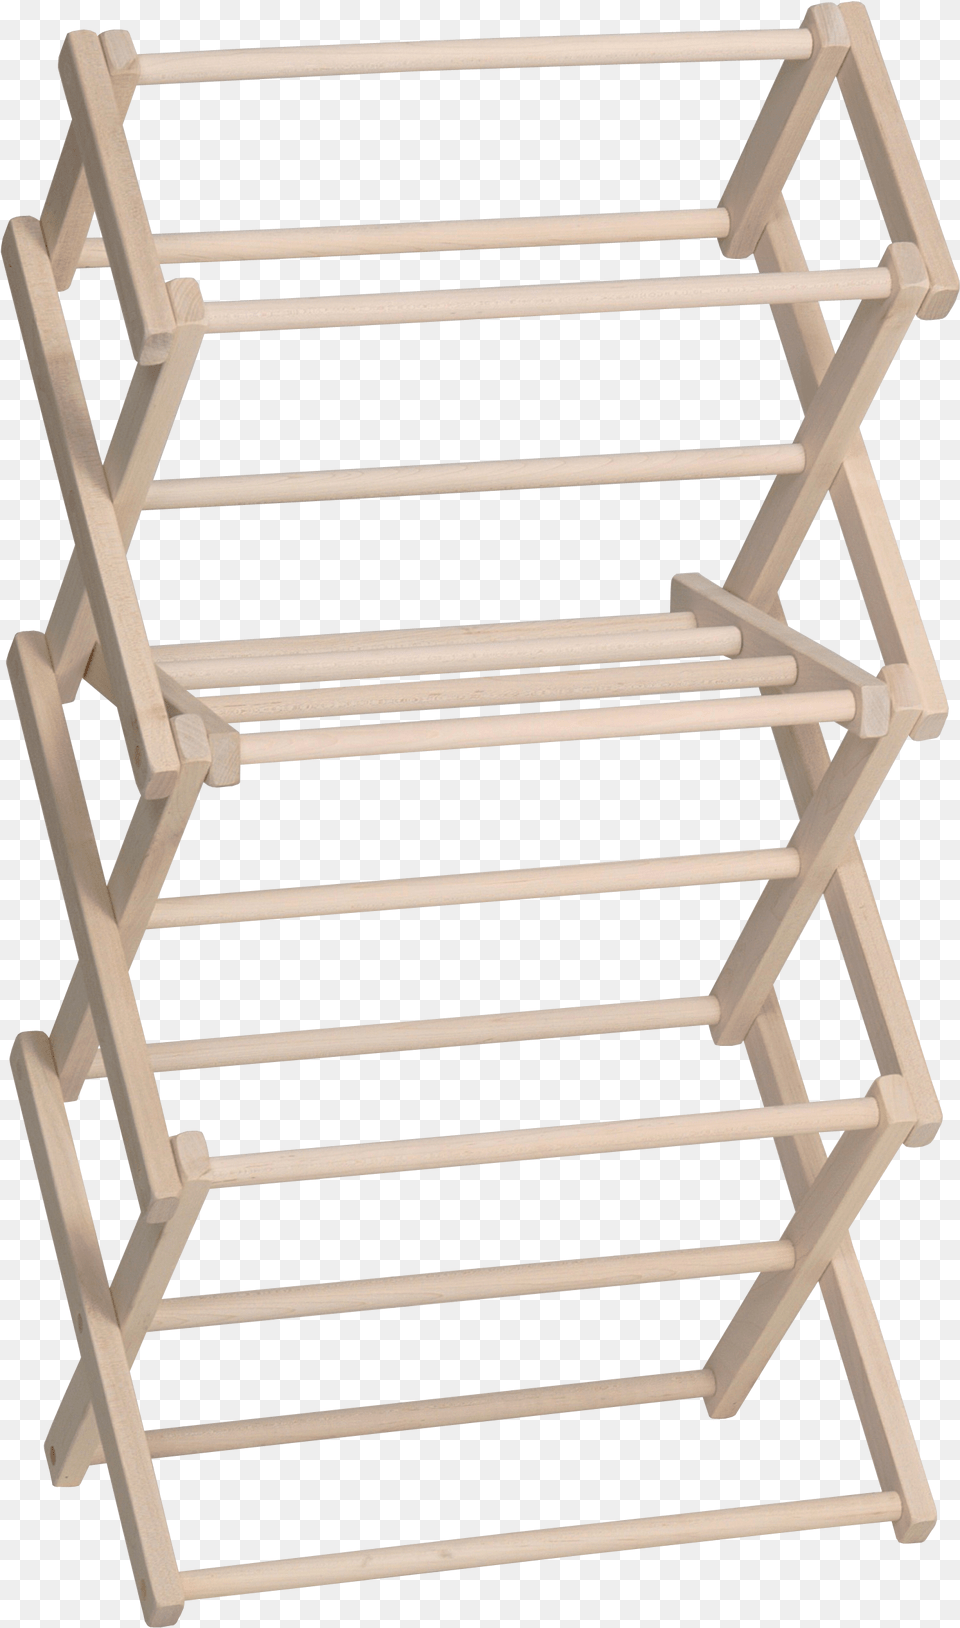 Small Wooden Clothes Drying Rack Heavy Duty 100 Hardwood Clothes Horse, Drying Rack, Crib, Furniture, Infant Bed Free Png